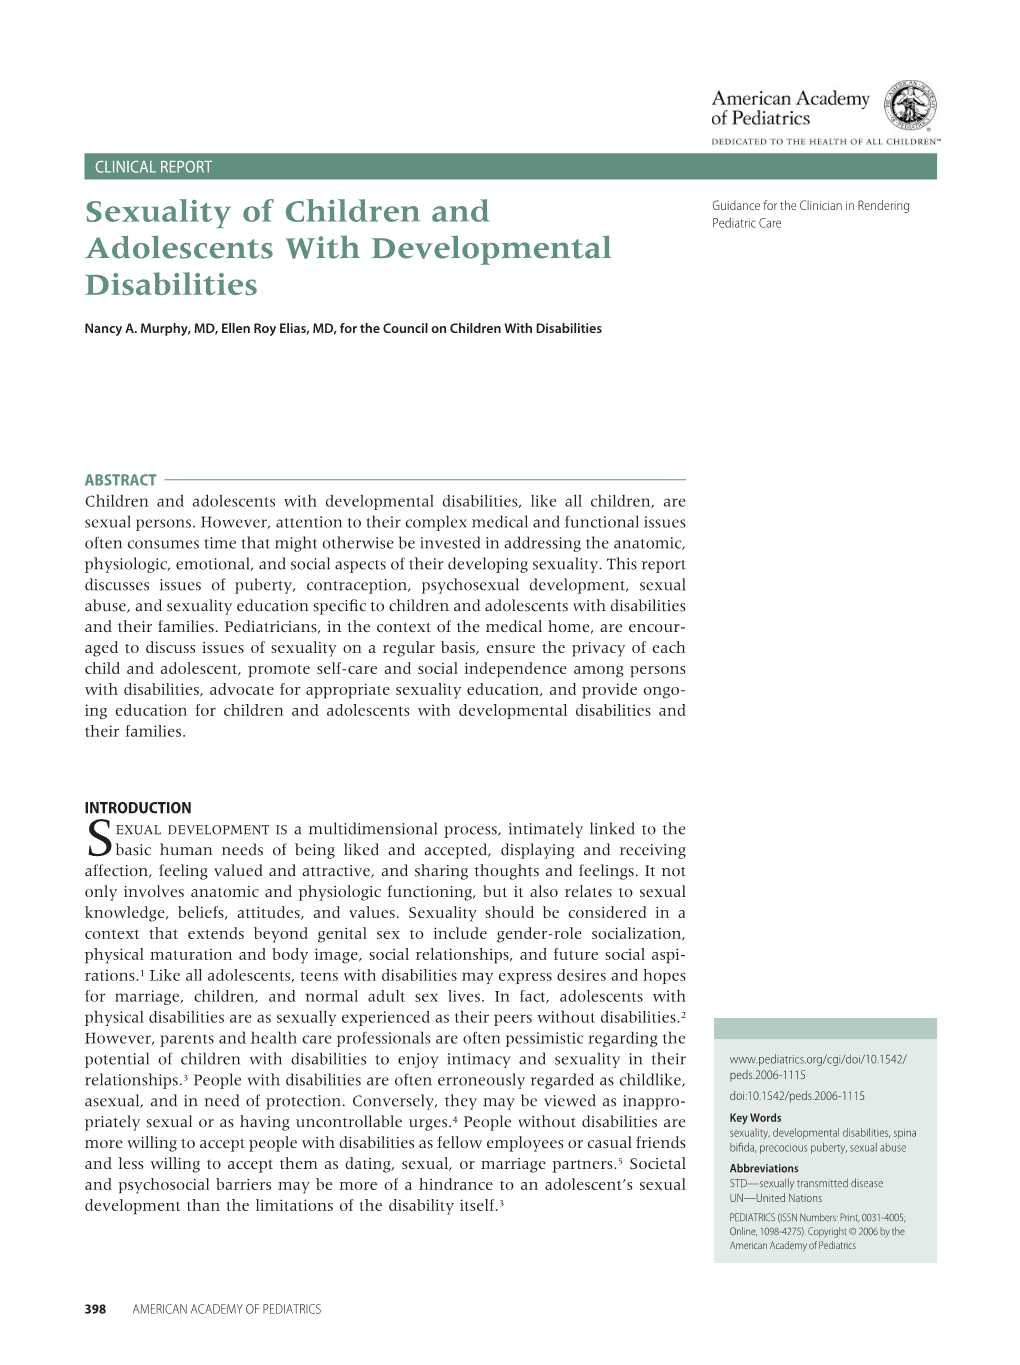 Sexuality of Children and Adolescents With